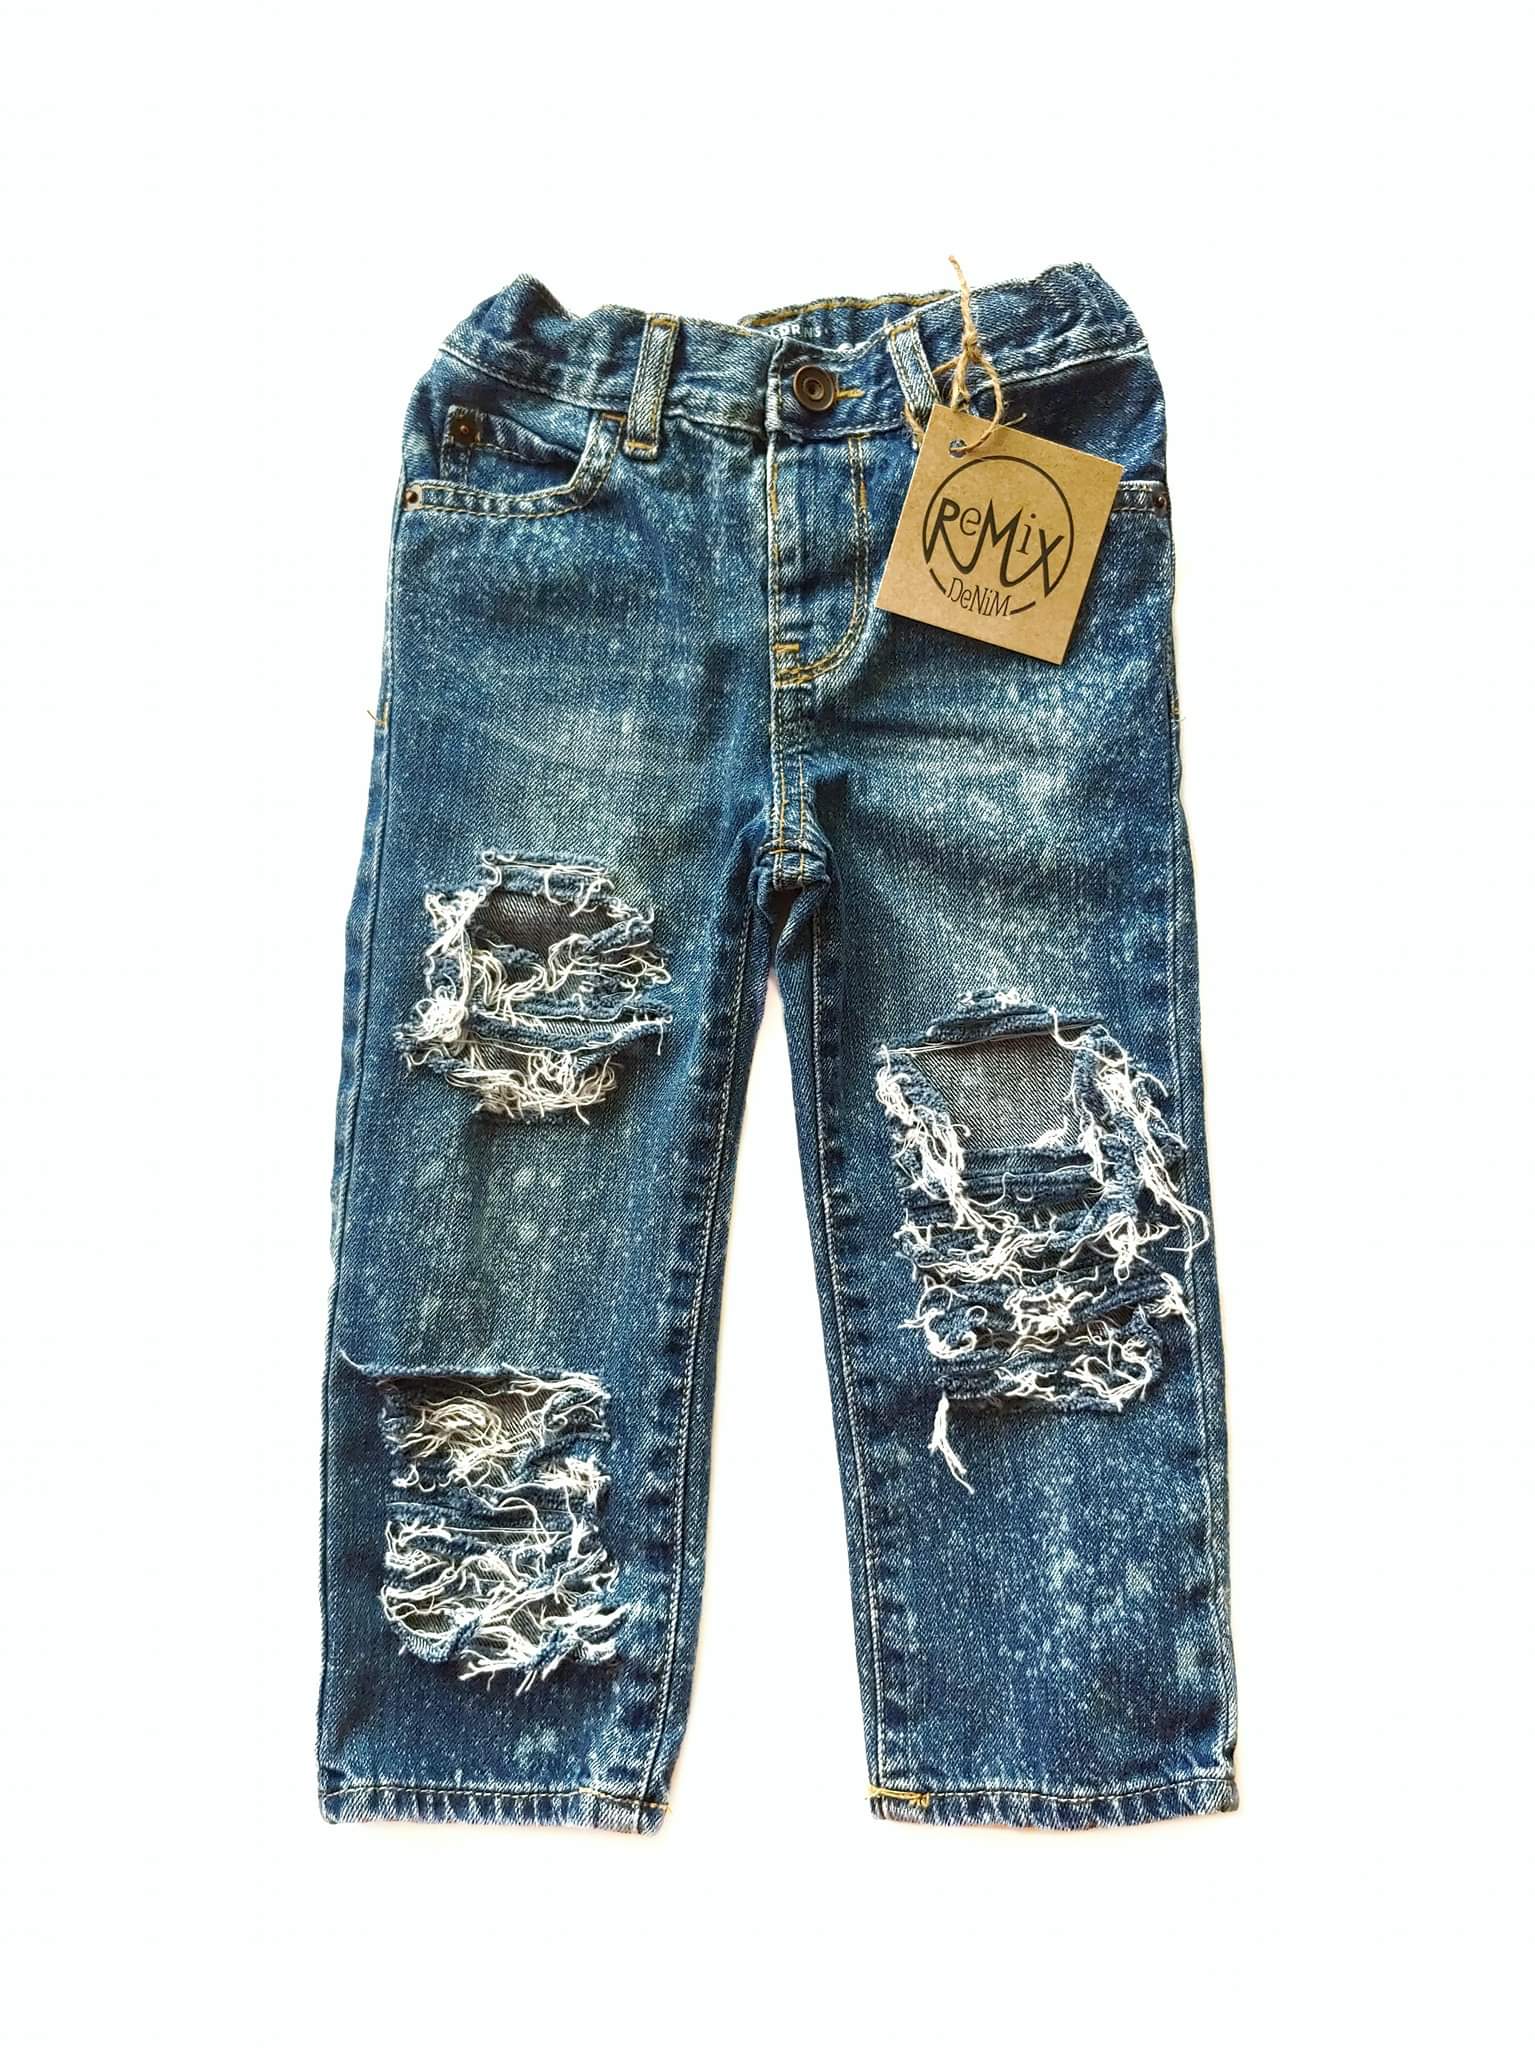 Buy Casual Ripped Rough Jeans for Men (30, Greenish Blue) at Amazon.in